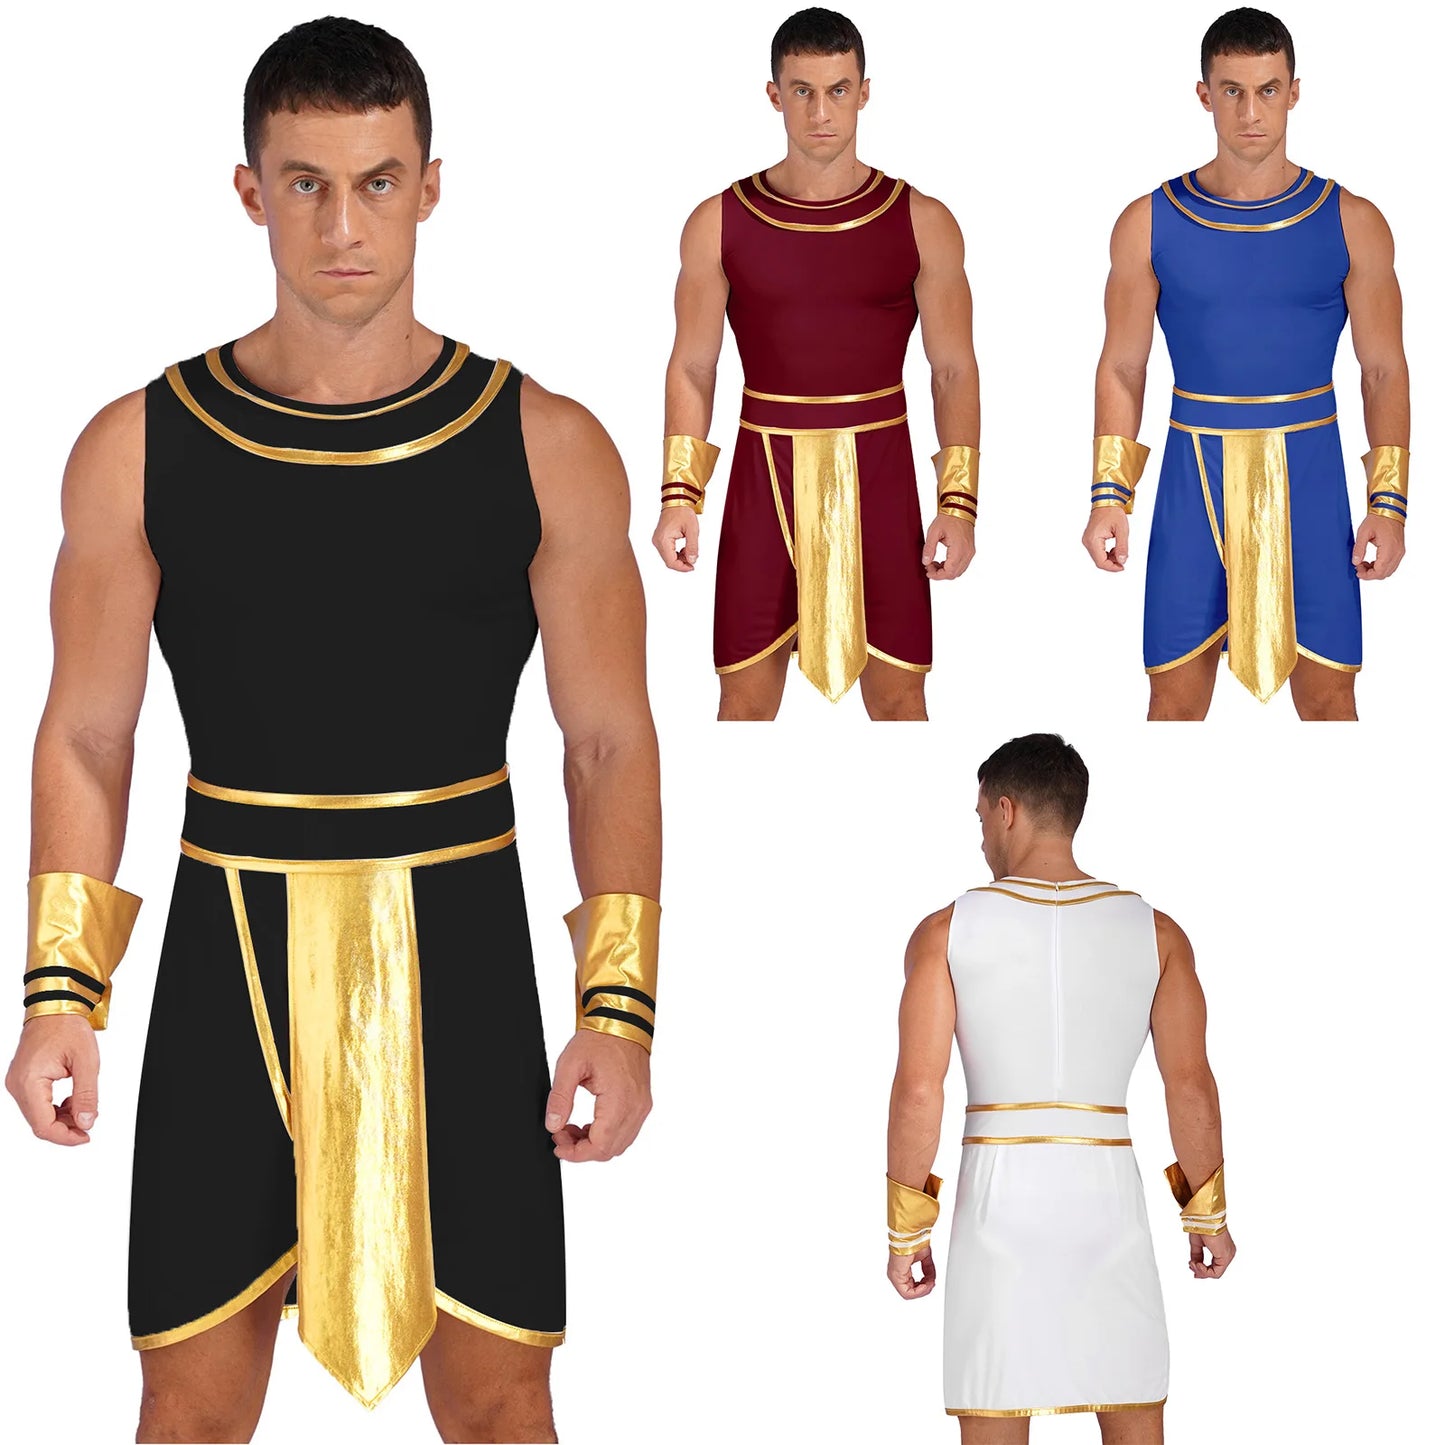 A person models five different colored versions of an ancient Egyptian-inspired costume, perfect for the Maramalive™ Adults Men's Ancient Egypt Costume Halloween Greek Roman Toga Cosplay Dress One Shoulder Strap Suspender Ruffle Skirt Dress Up, featuring a sleeveless tunic with a gold collar and belt. The colors displayed are black, red, blue, gold, and white—ideal for Movie & TV appearances or even medieval-themed events.